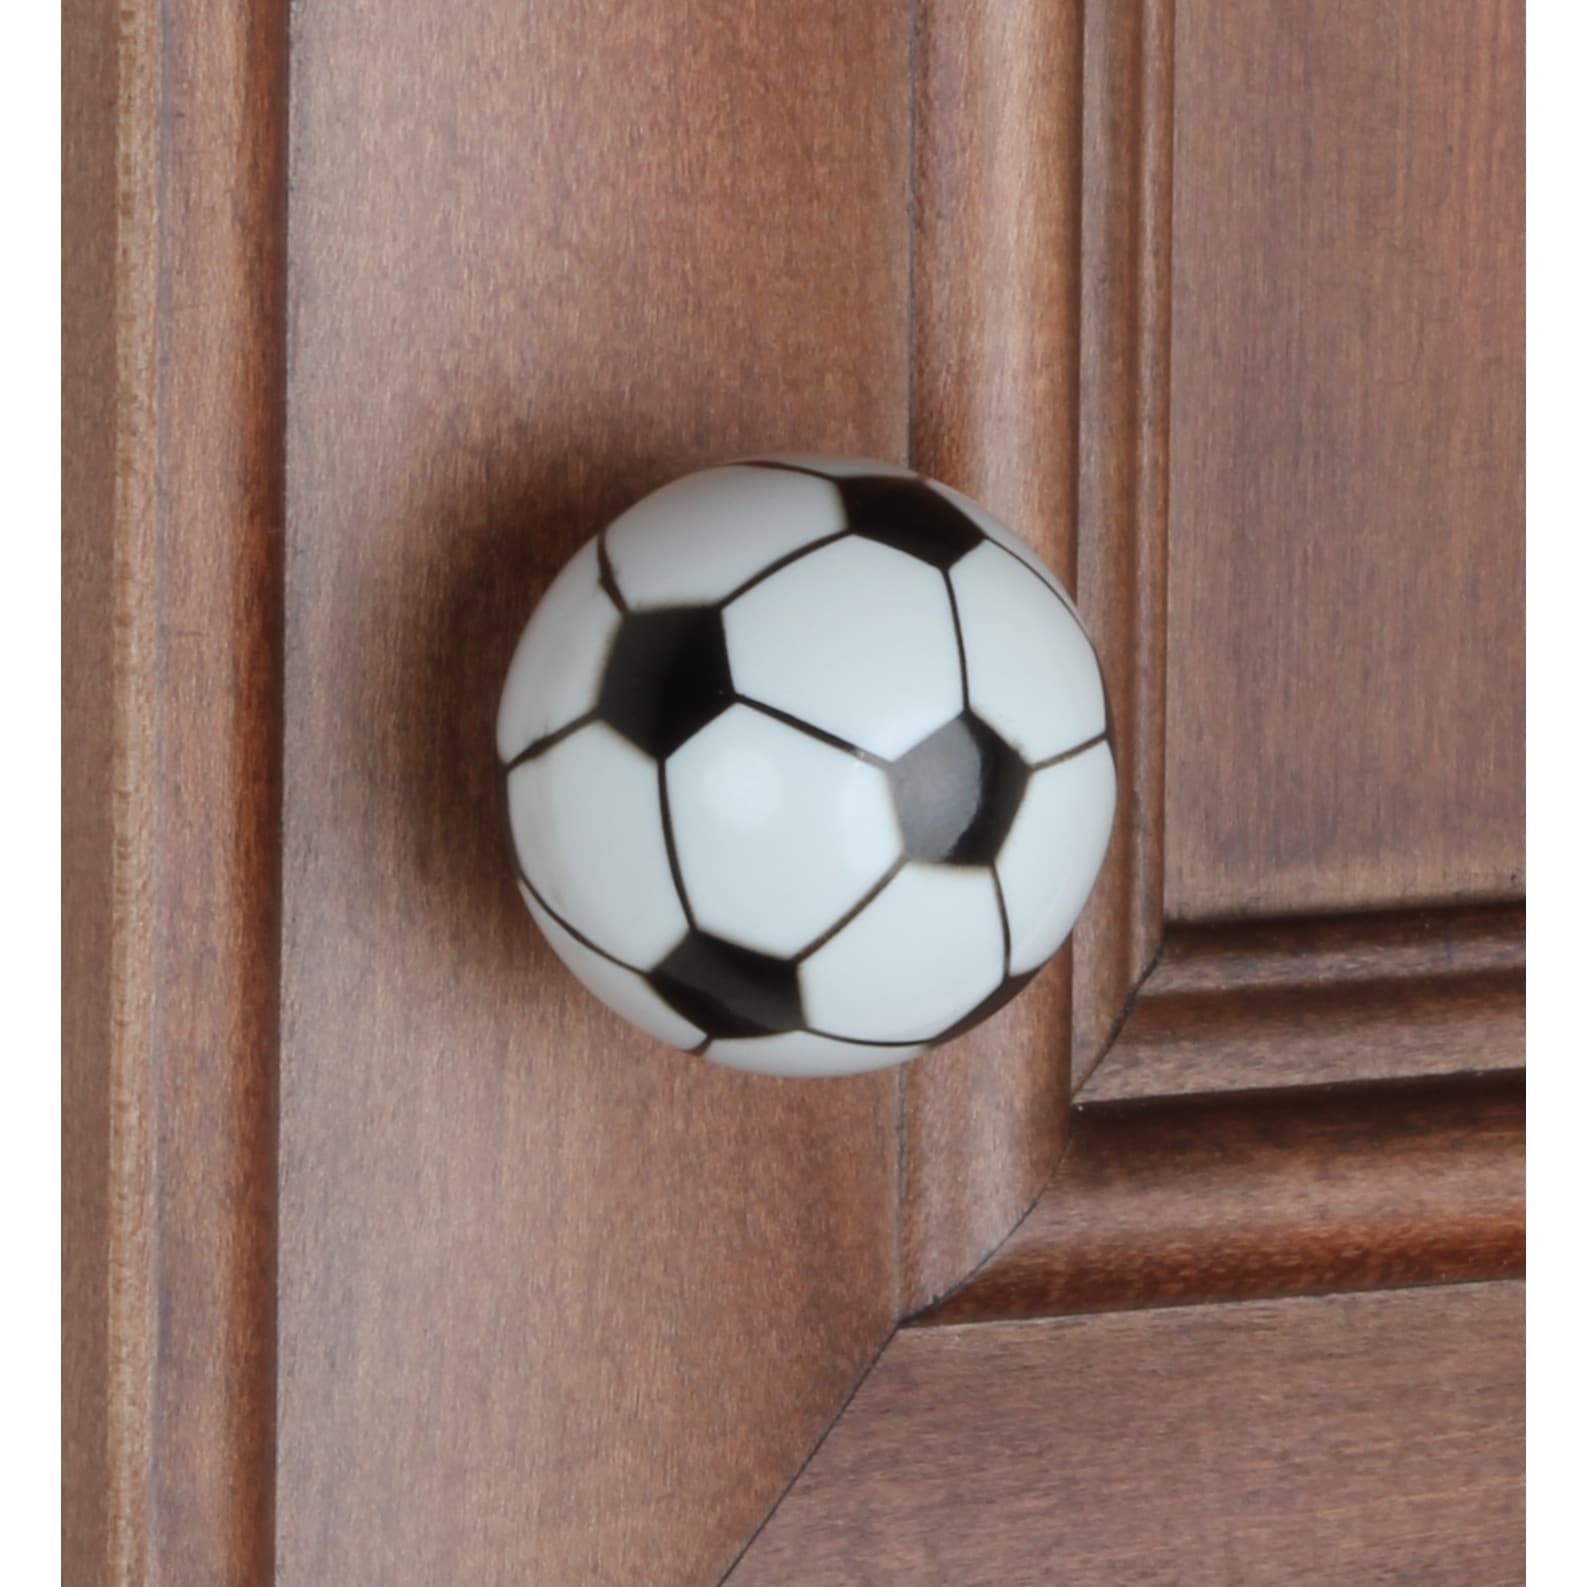 GlideRite 1-1/4 in. Soccer Ball Sports Dresser Drawer Cabinet Knobs, Pack of 10 - image 3 of 3